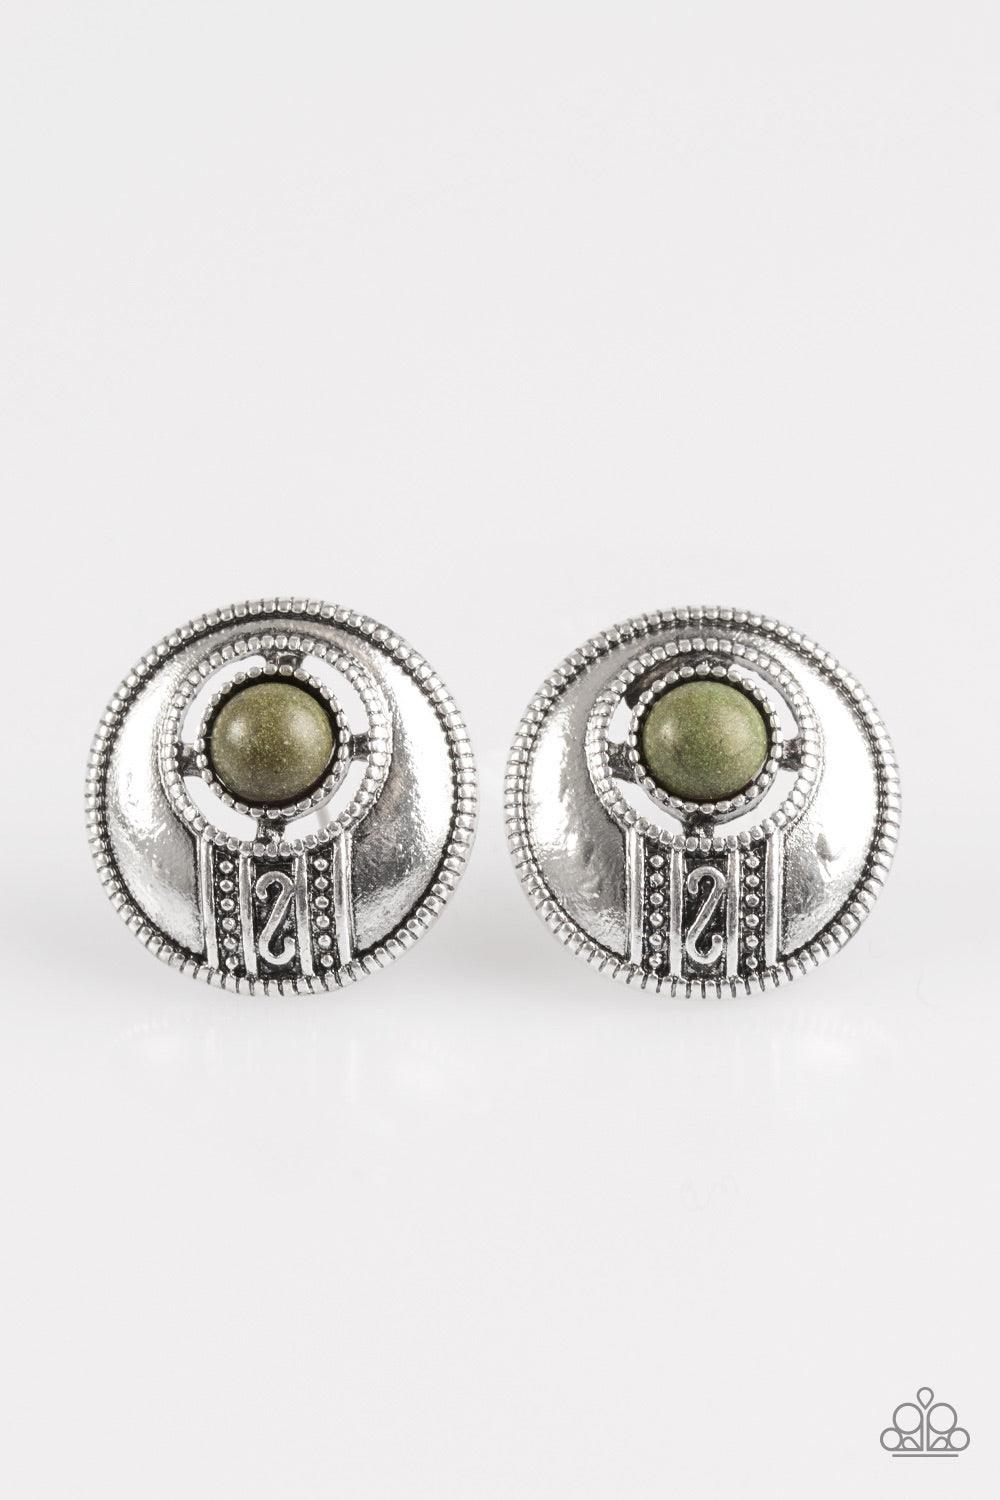 Paparazzi Accessories The Four Corners - Green A refreshing green stone adorns an antiqued suspended frame above a stunning silver filigree pattern. Silver dots dance around the outside of the stone and outer frame for an artisan inspired style. Earring a